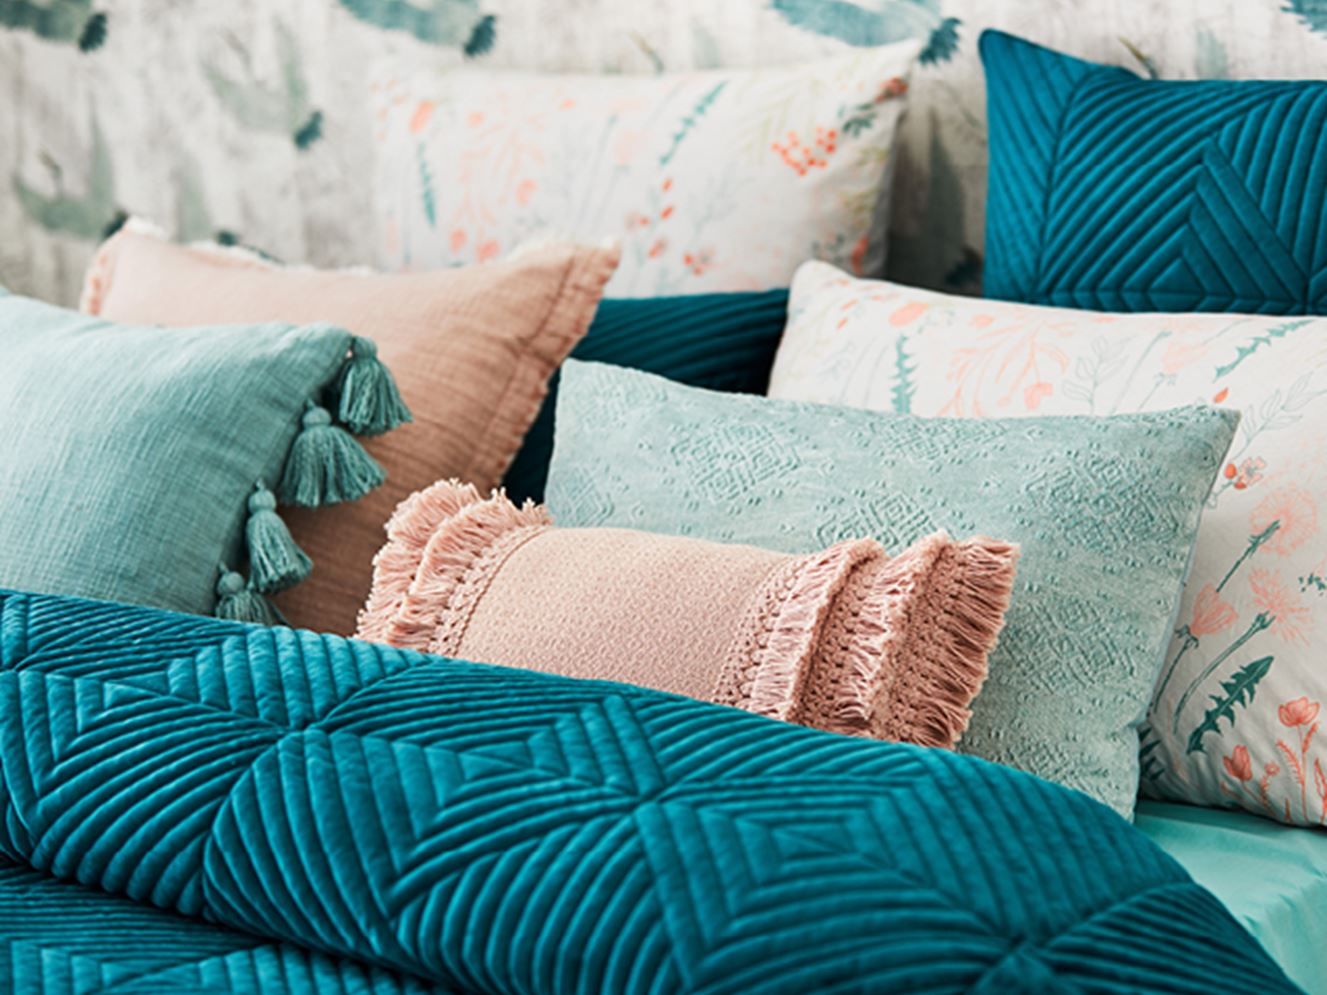 Various pillows with teal, pink and floral tones placed on the bed